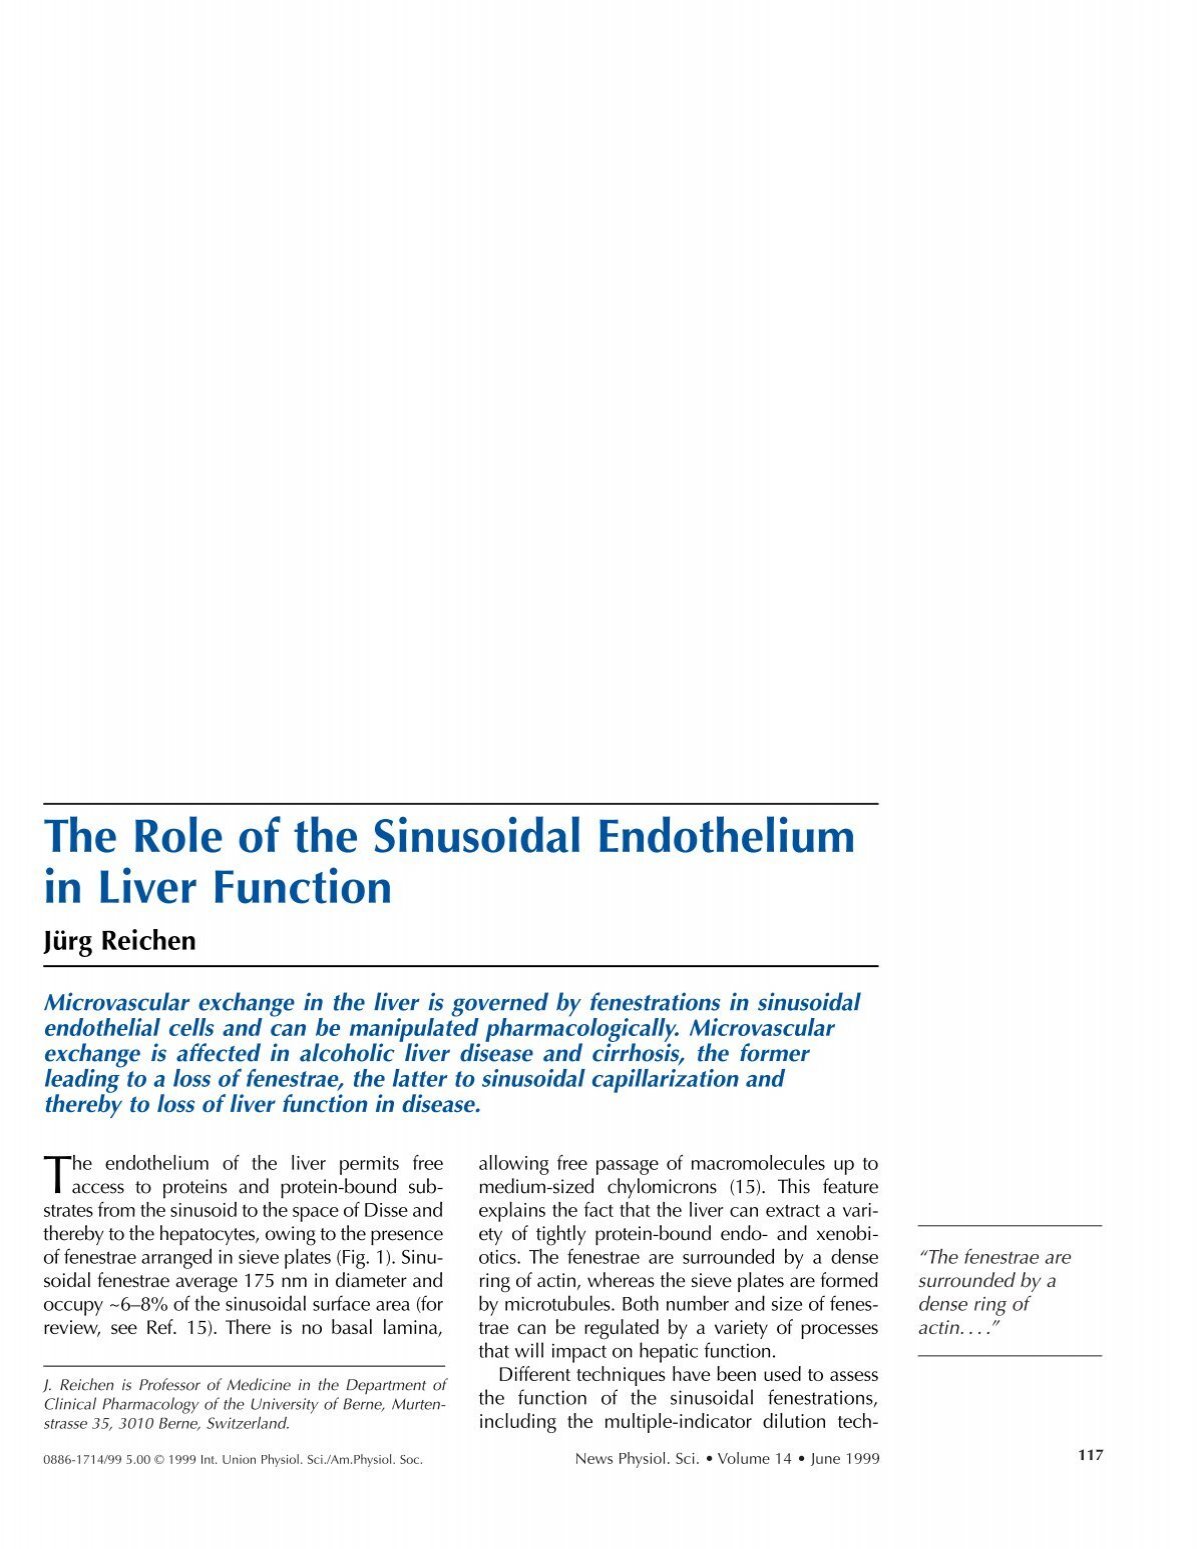 sinusoids of liver in function